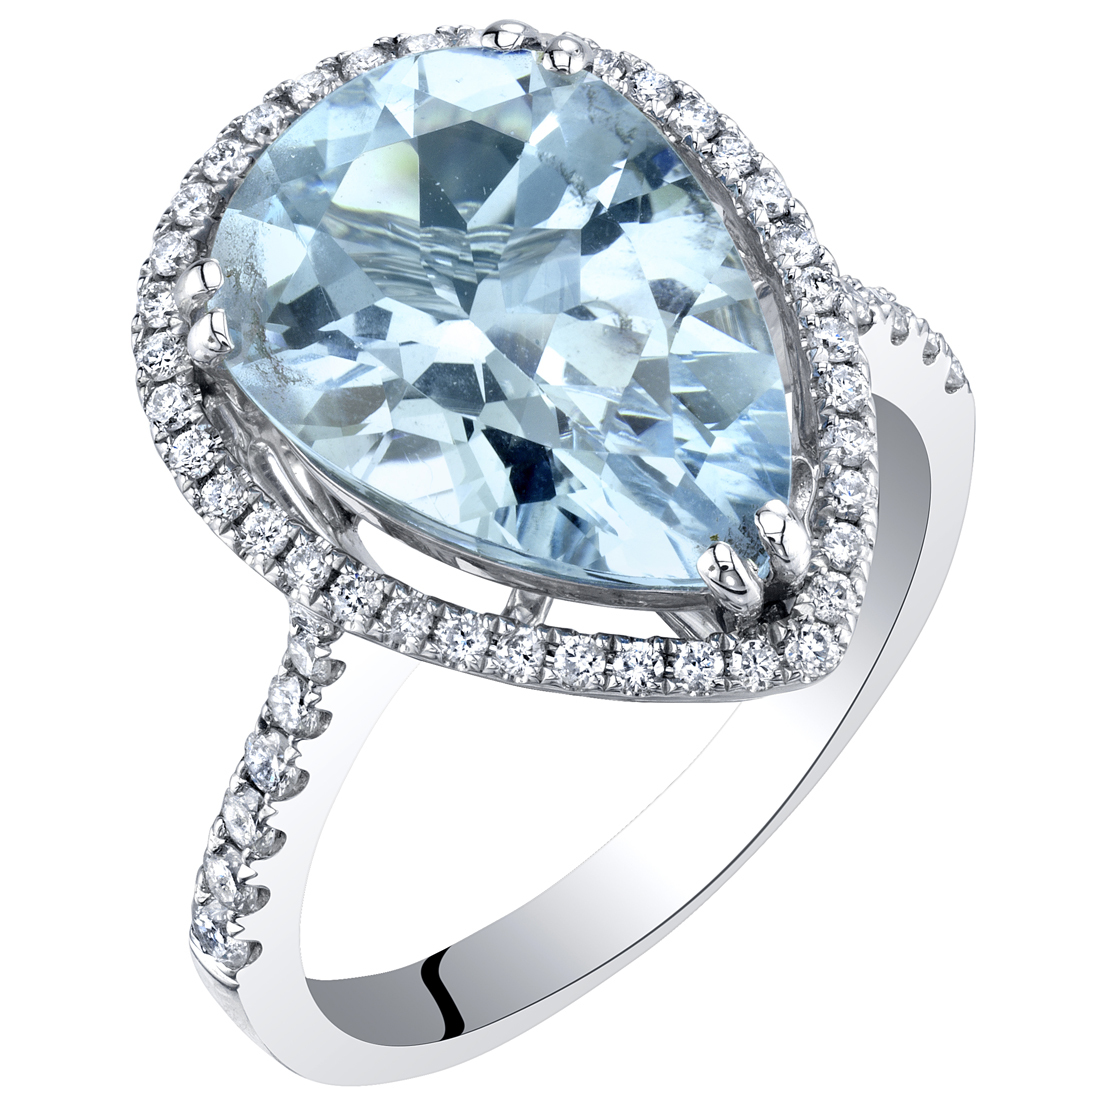 Perfection is the Other Identity of the Moissanite Rings NYC